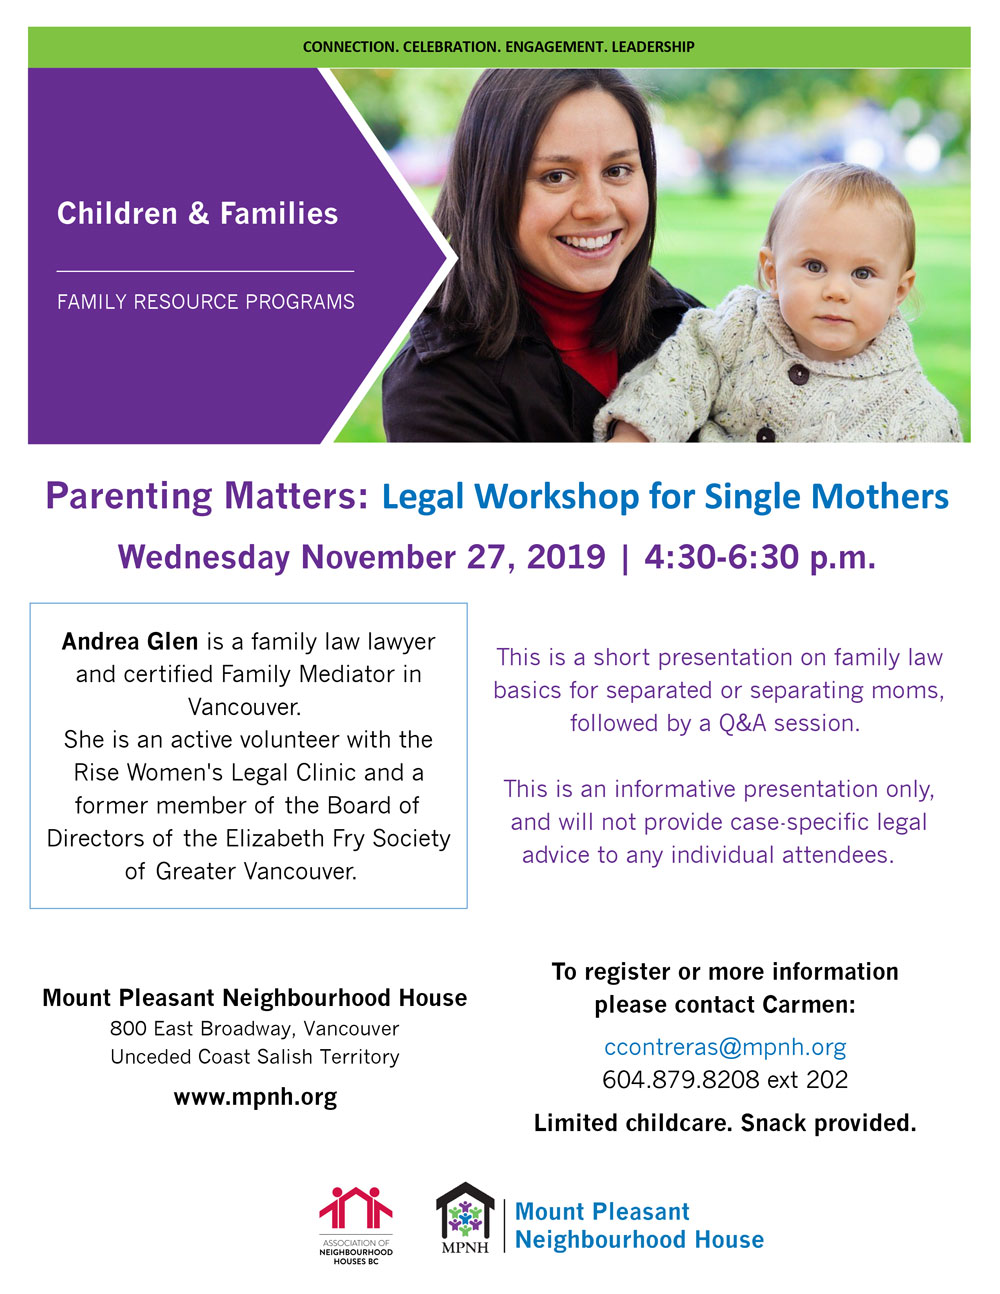 An image of the poster with event details, featuring a photo of a mom with a young child, spending time together outdoors